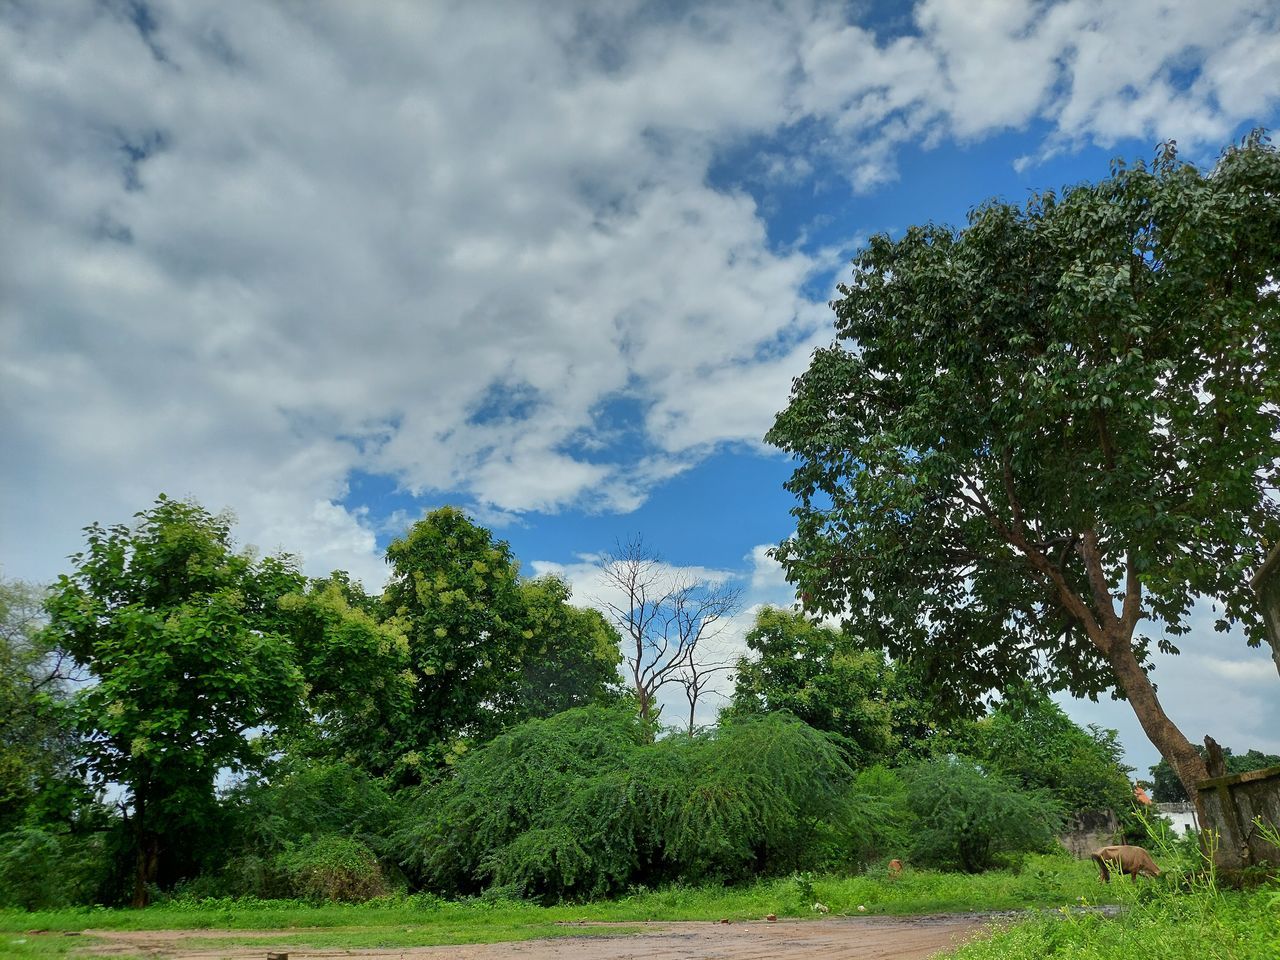 tree, plant, sky, nature, cloud, rural area, environment, grass, landscape, green, beauty in nature, hill, scenics - nature, no people, land, outdoors, travel, meadow, blue, tranquility, travel destinations, growth, day, field, non-urban scene, flower, tourism, forest, tranquil scene